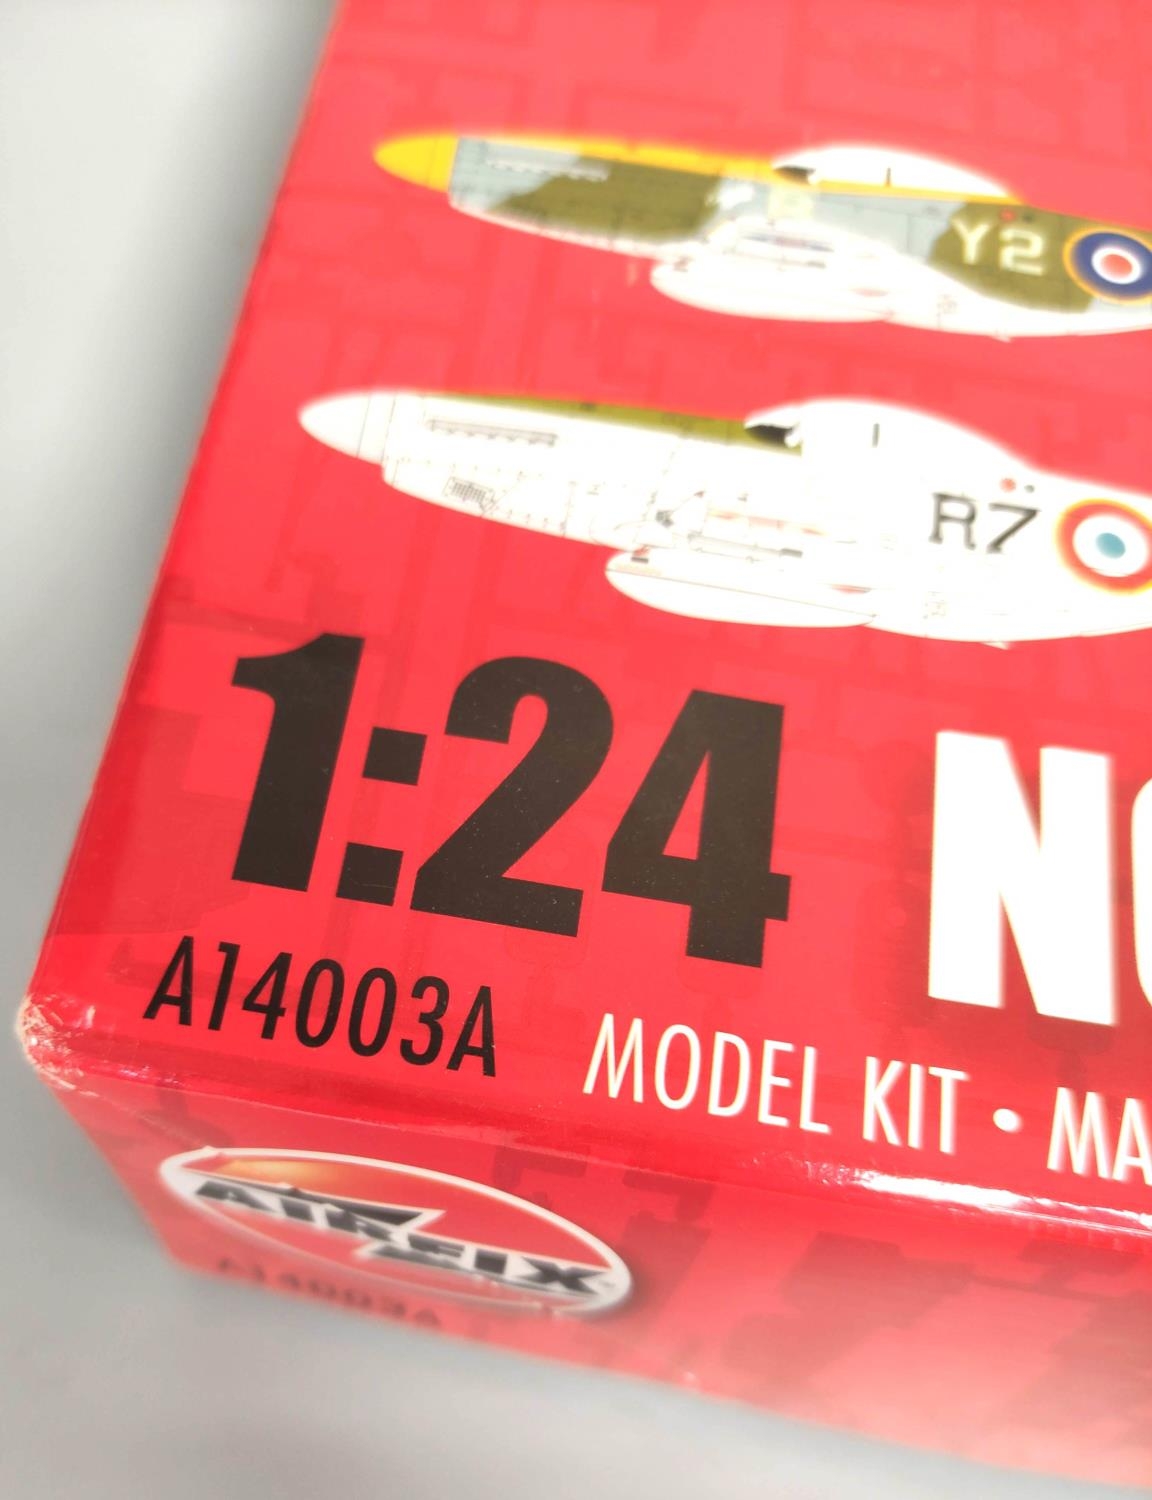 Airfix. Boxed 1:24 scale North American Mustang Mk.IV.A (P-51K). Kit no. A14003A. Complete and - Image 2 of 5